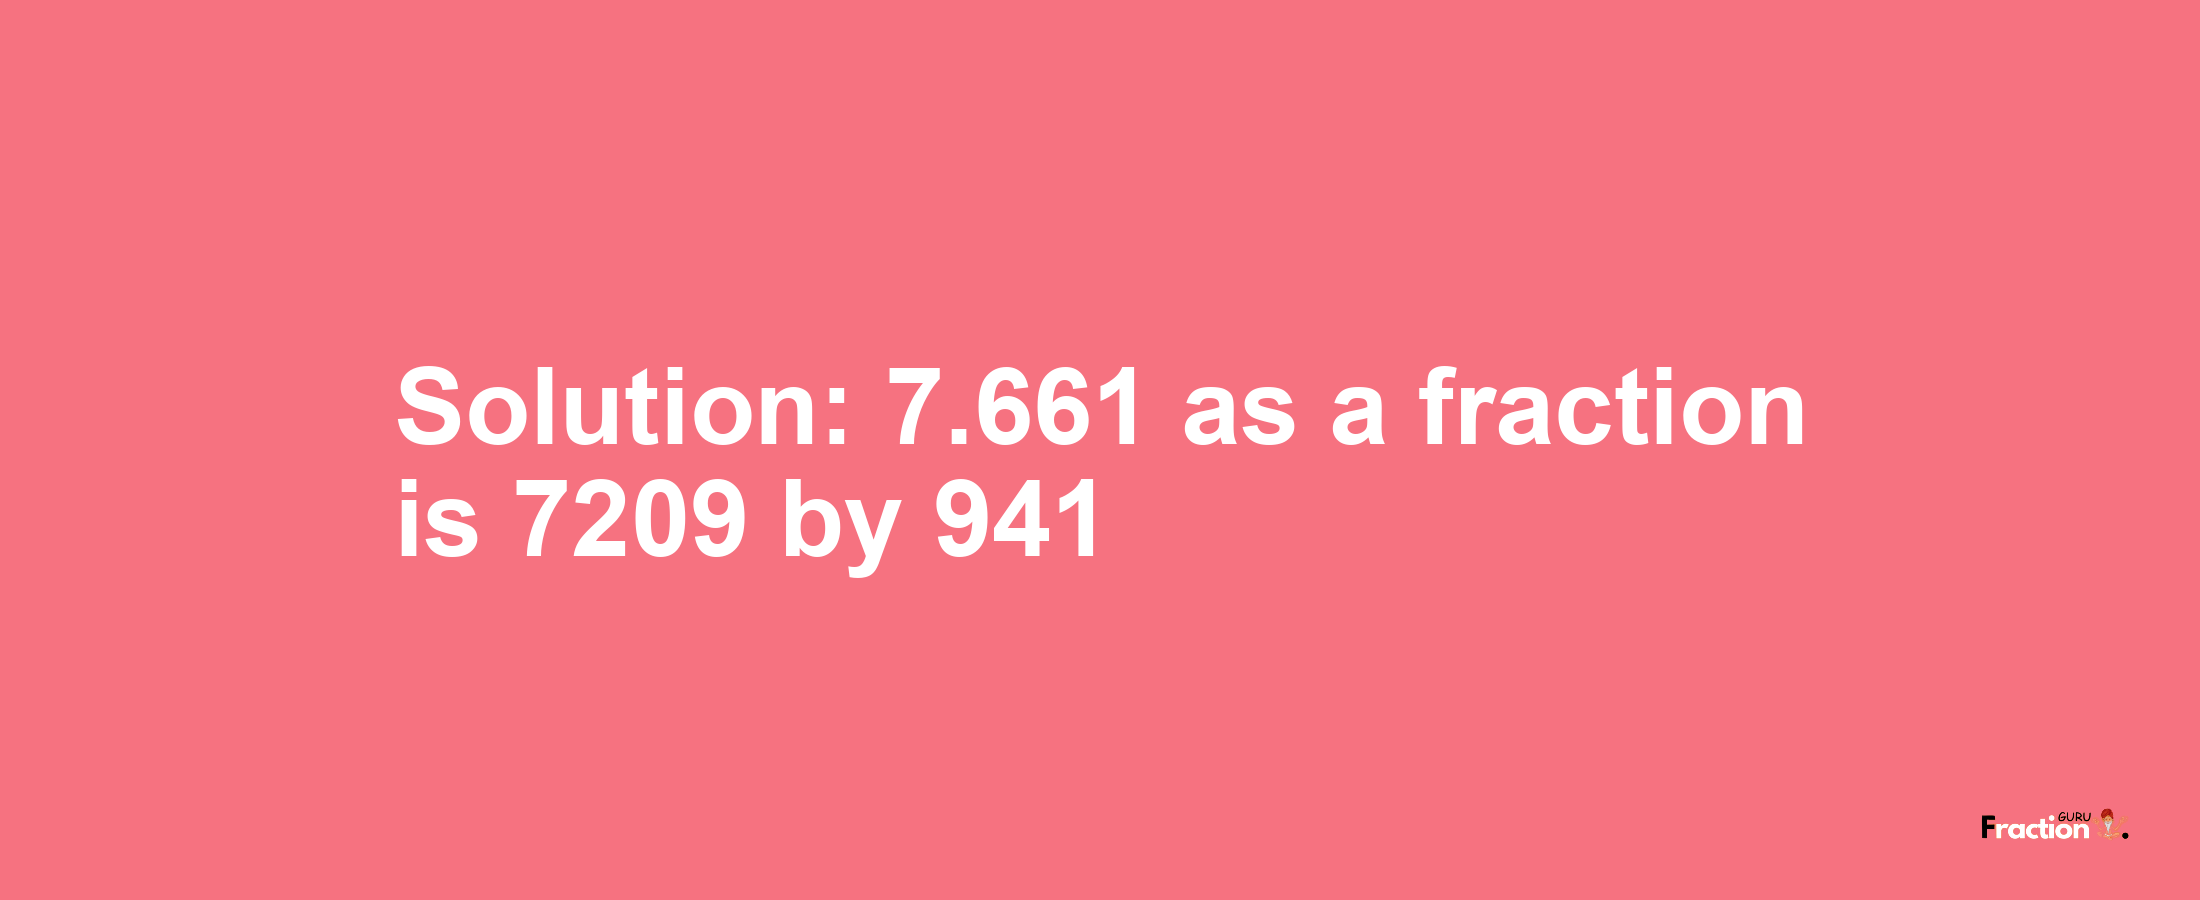 Solution:7.661 as a fraction is 7209/941